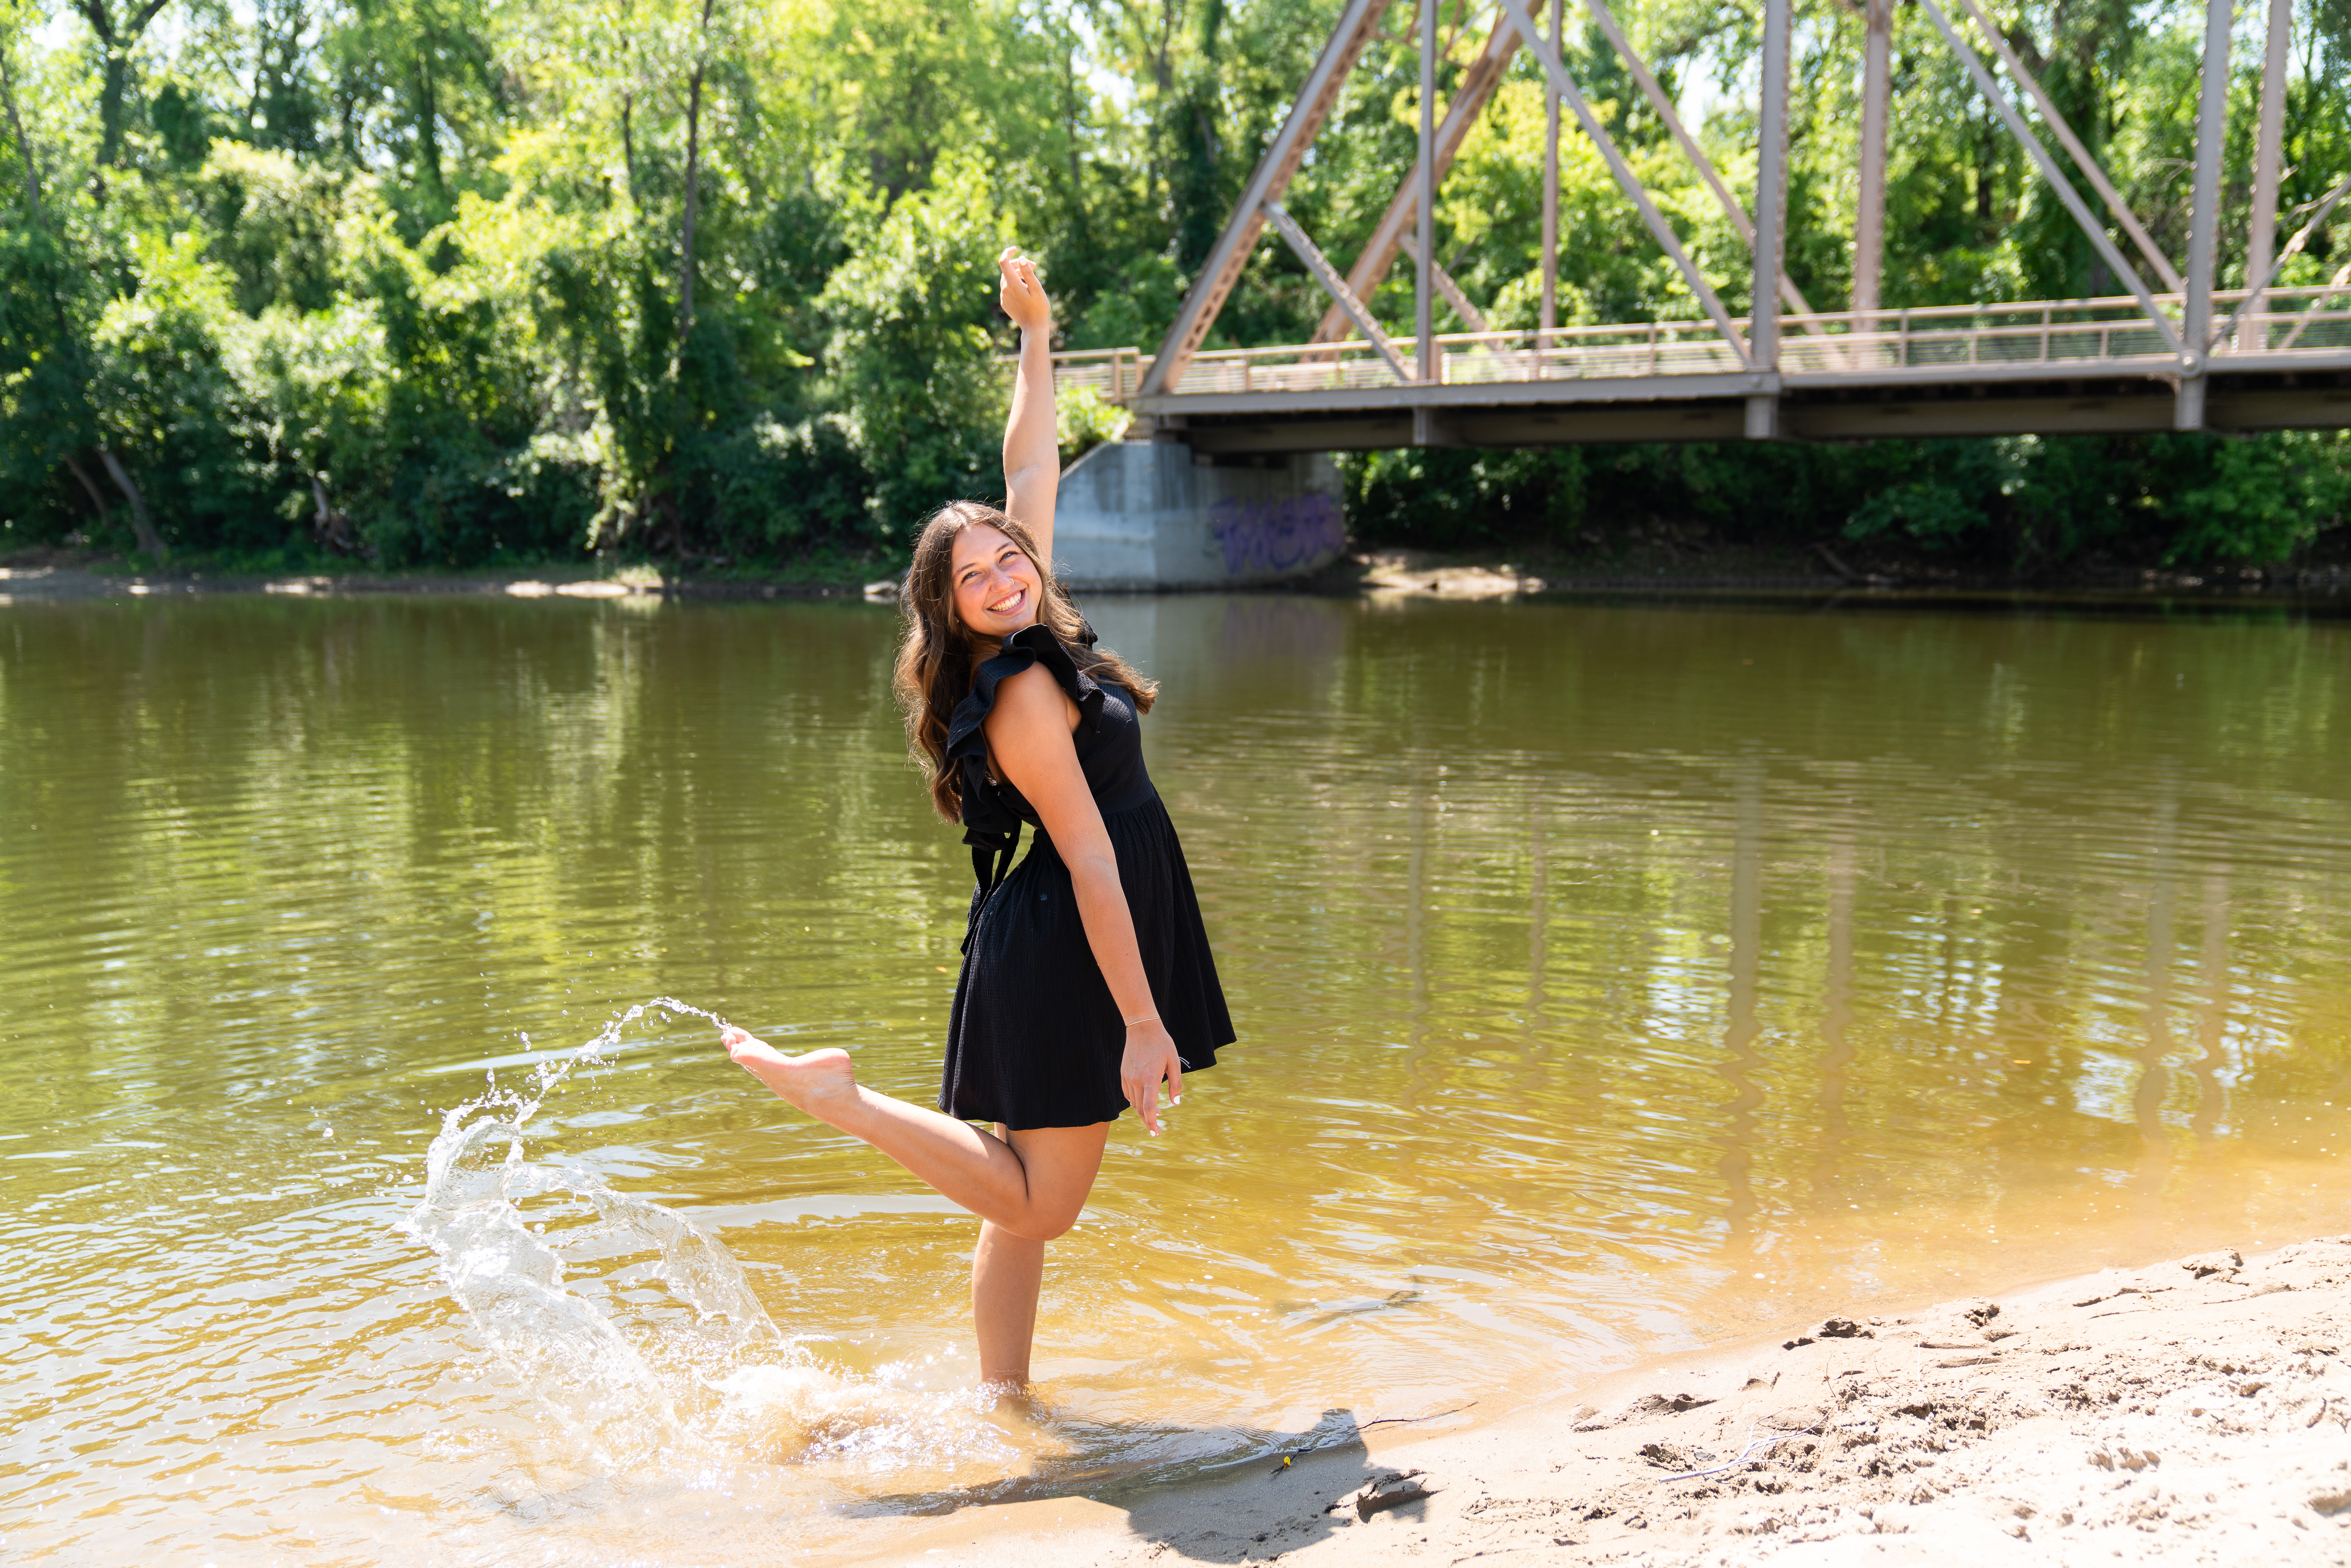 Senior girl plays in the water at Boom Island Park in Minneapolis during her senior photo shoot.